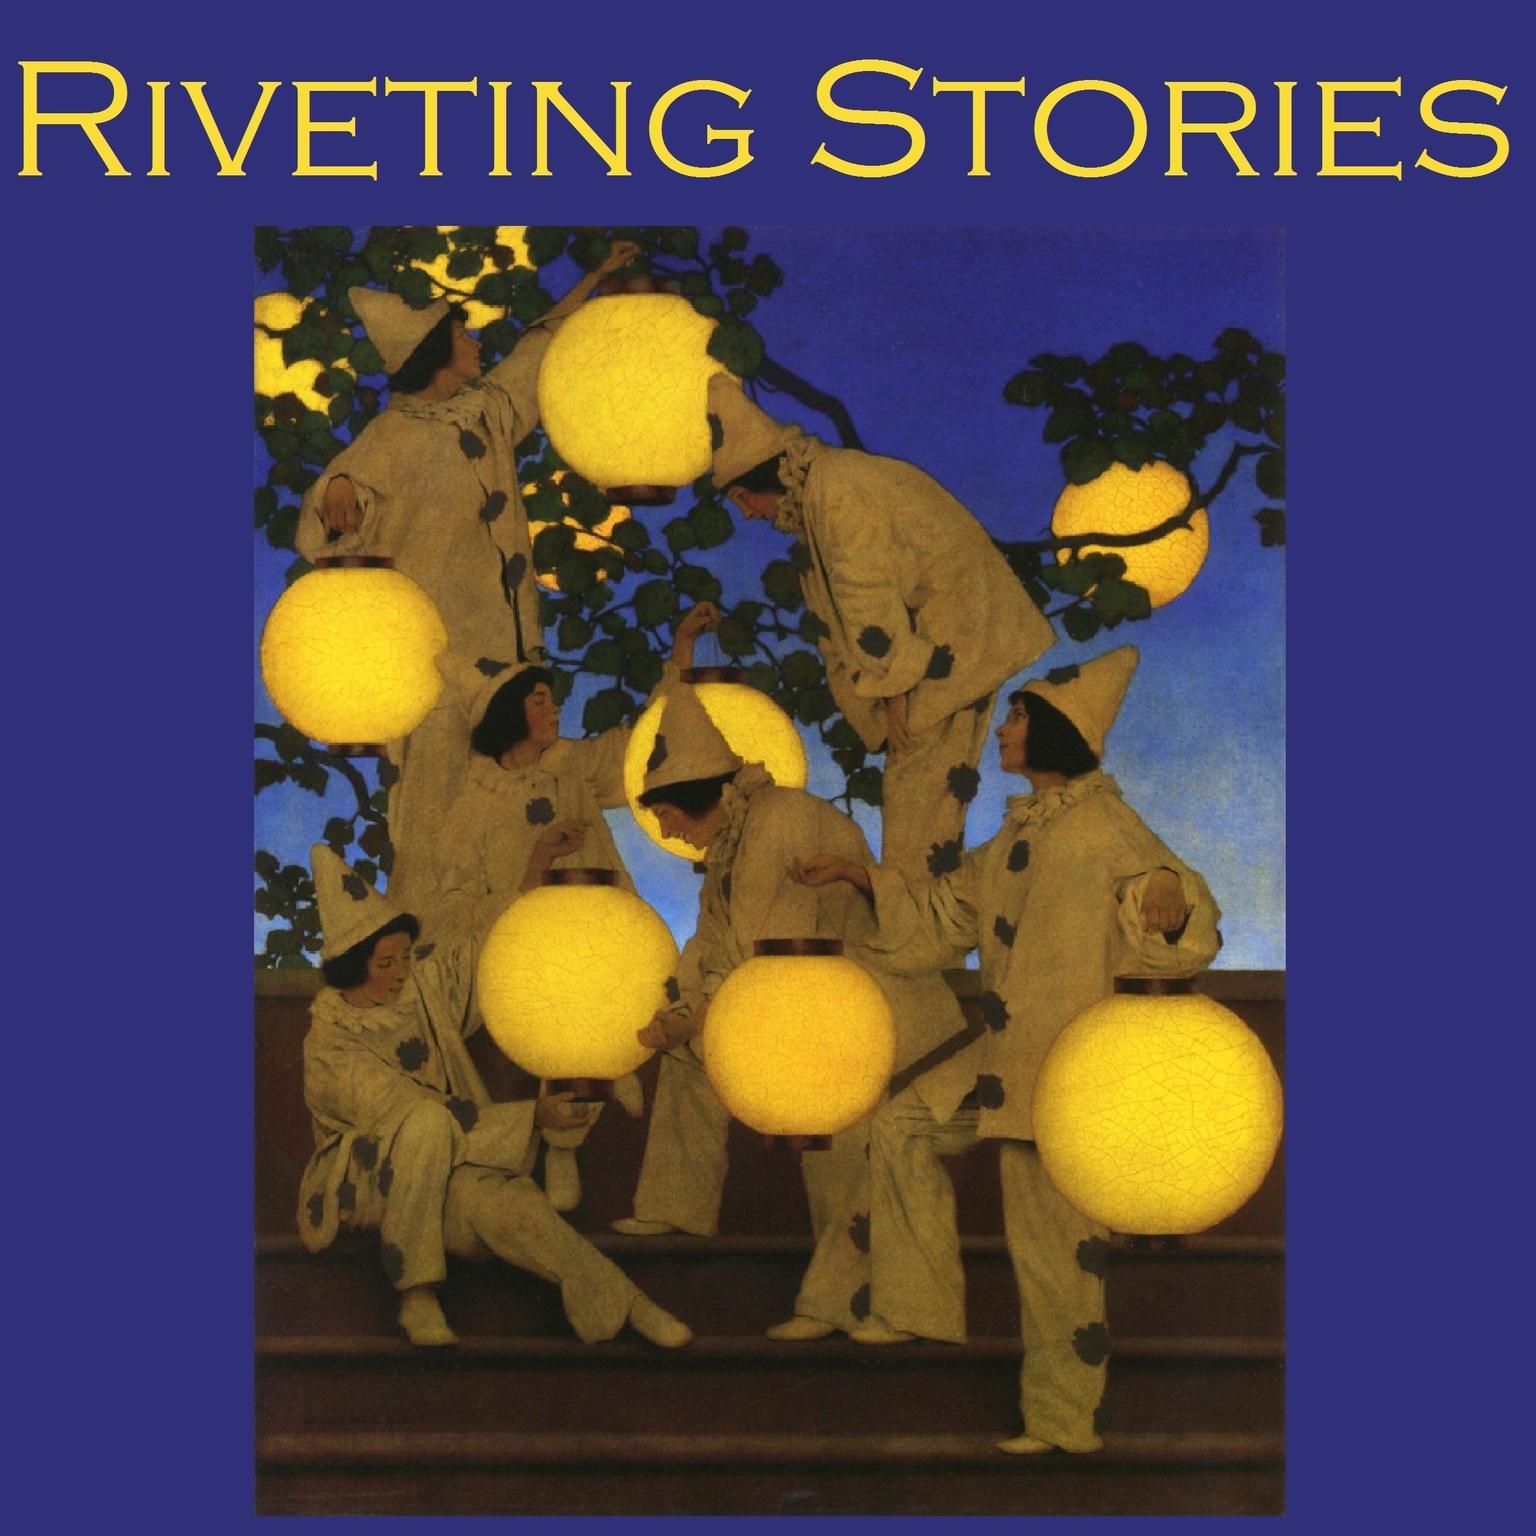 Riveting Stories: Thirty Gripping Tales by Literary Masters Audiobook, by various authors